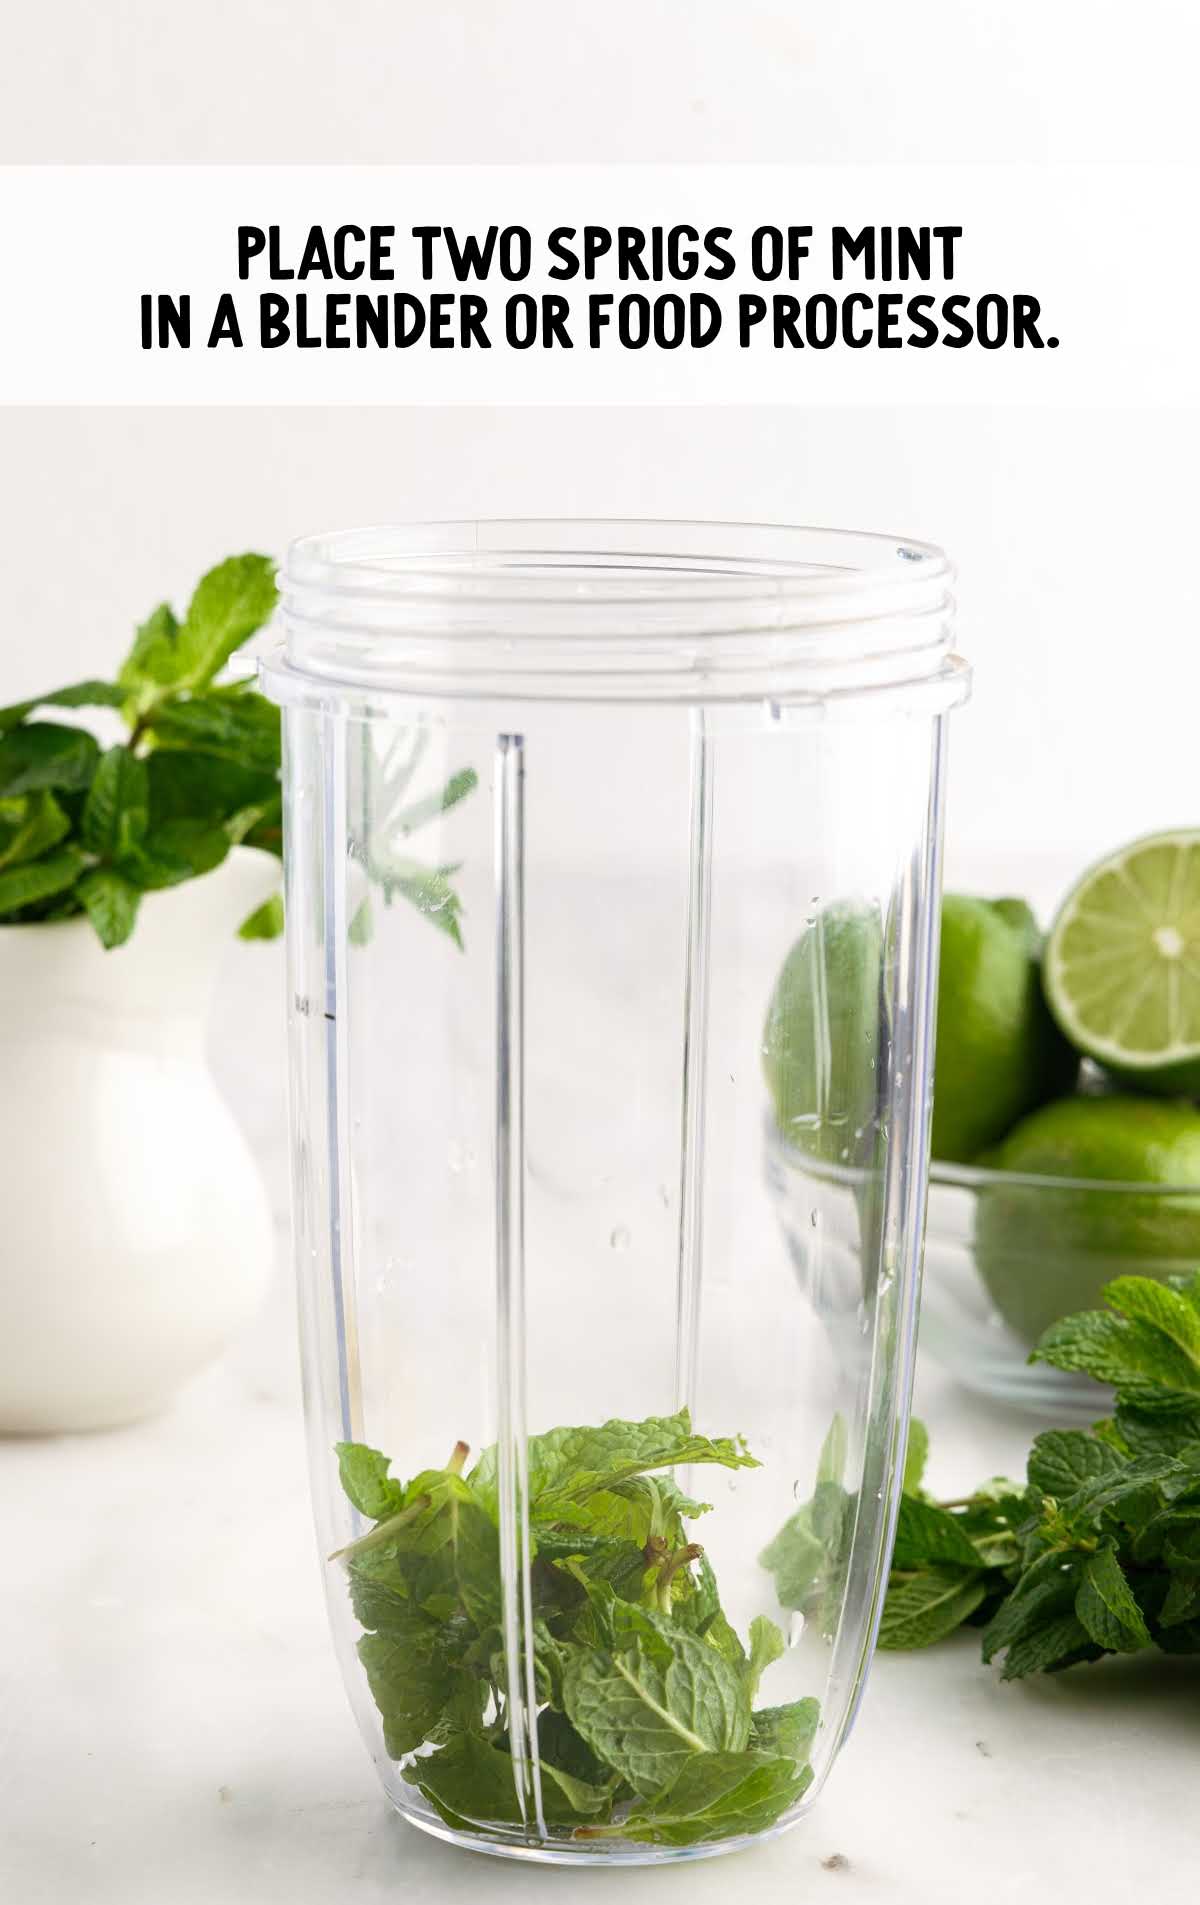 two sprigs of mint placed in a blender